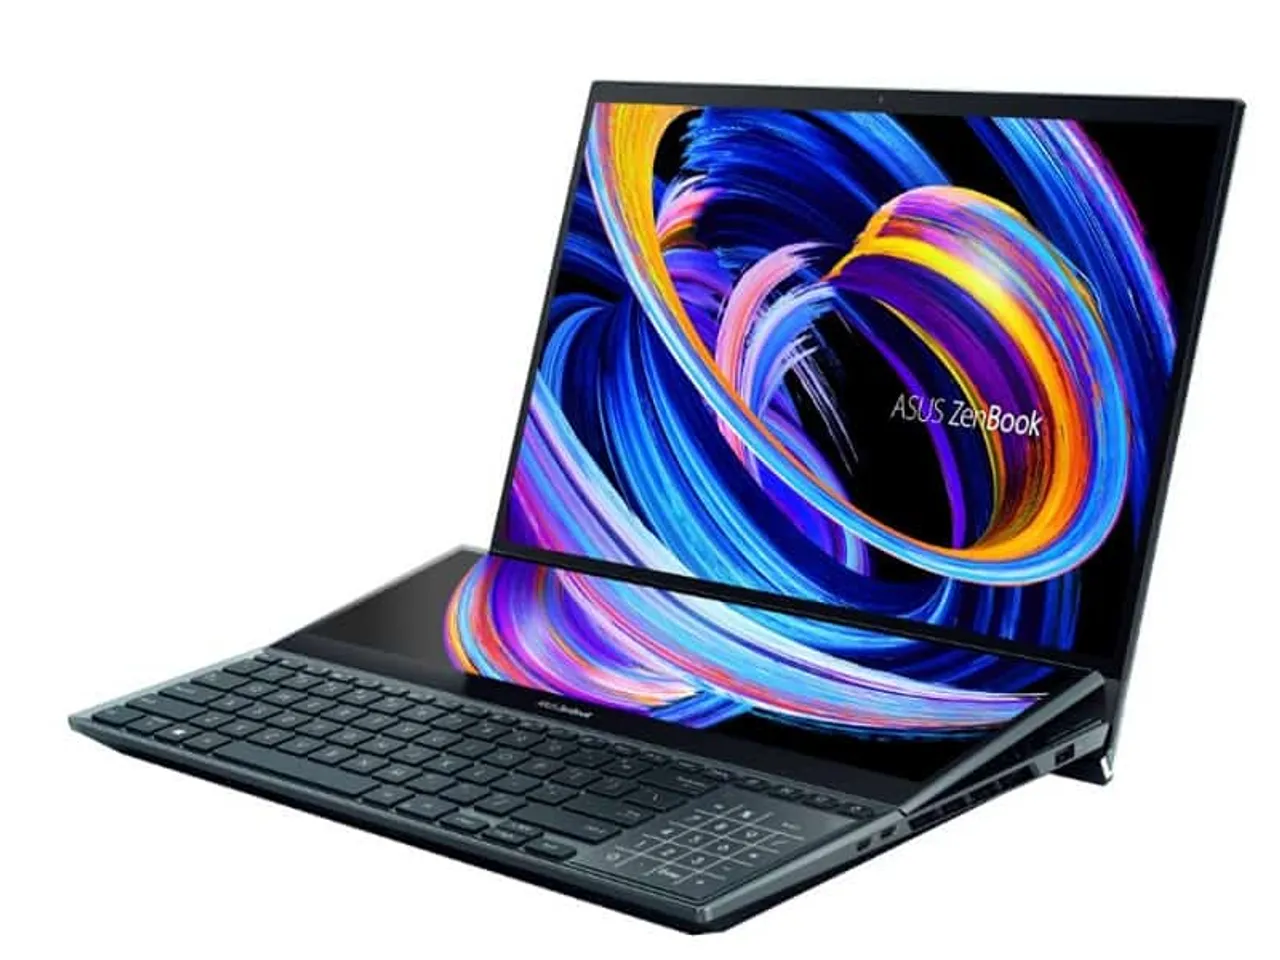 Asus Launches Dual-Screen Laptops in India in the Zenbook Series